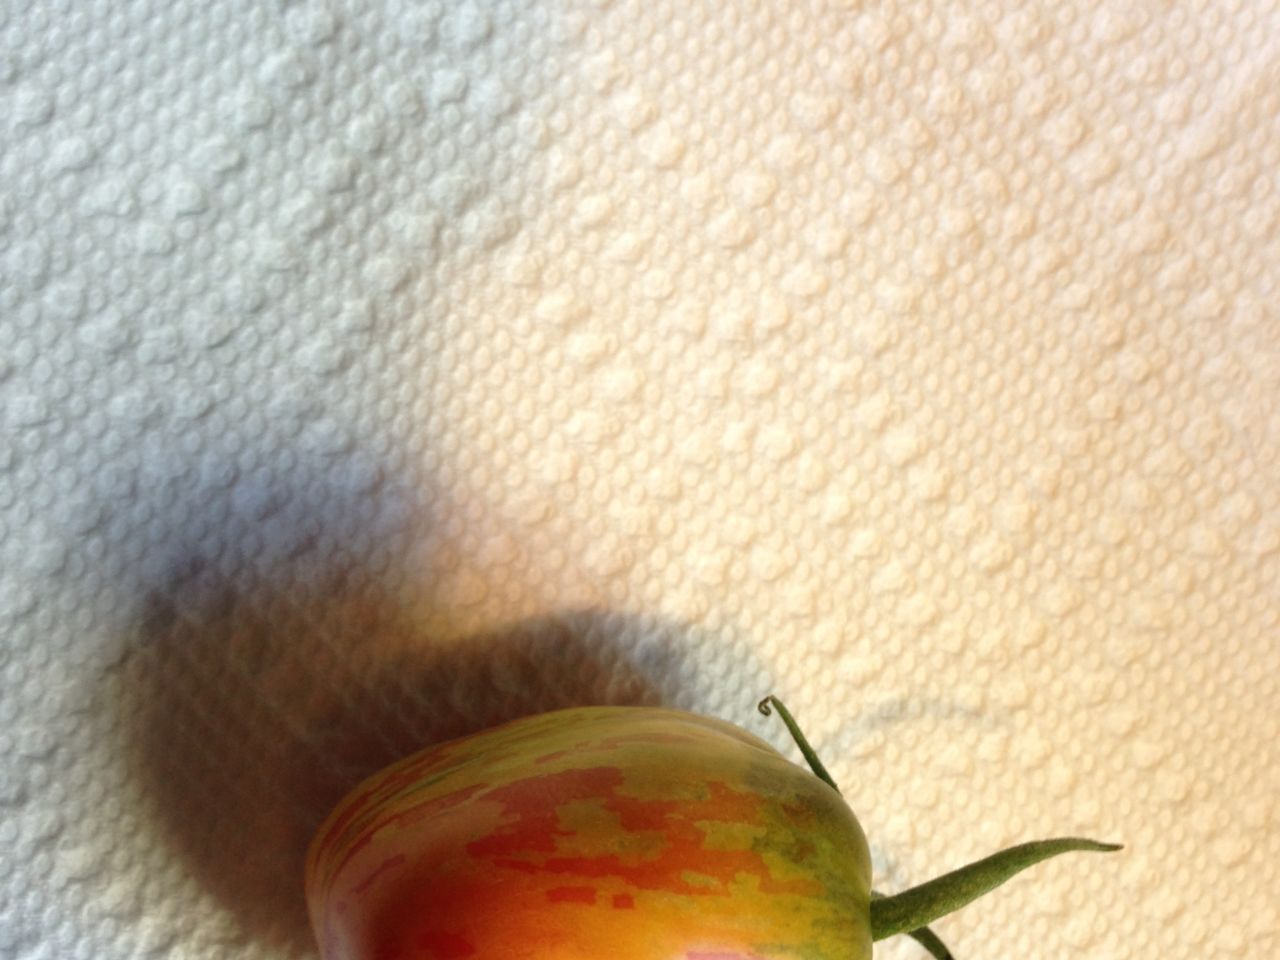 This heirloom Green Zebra tomato is almost too lovely to eat. Almost.